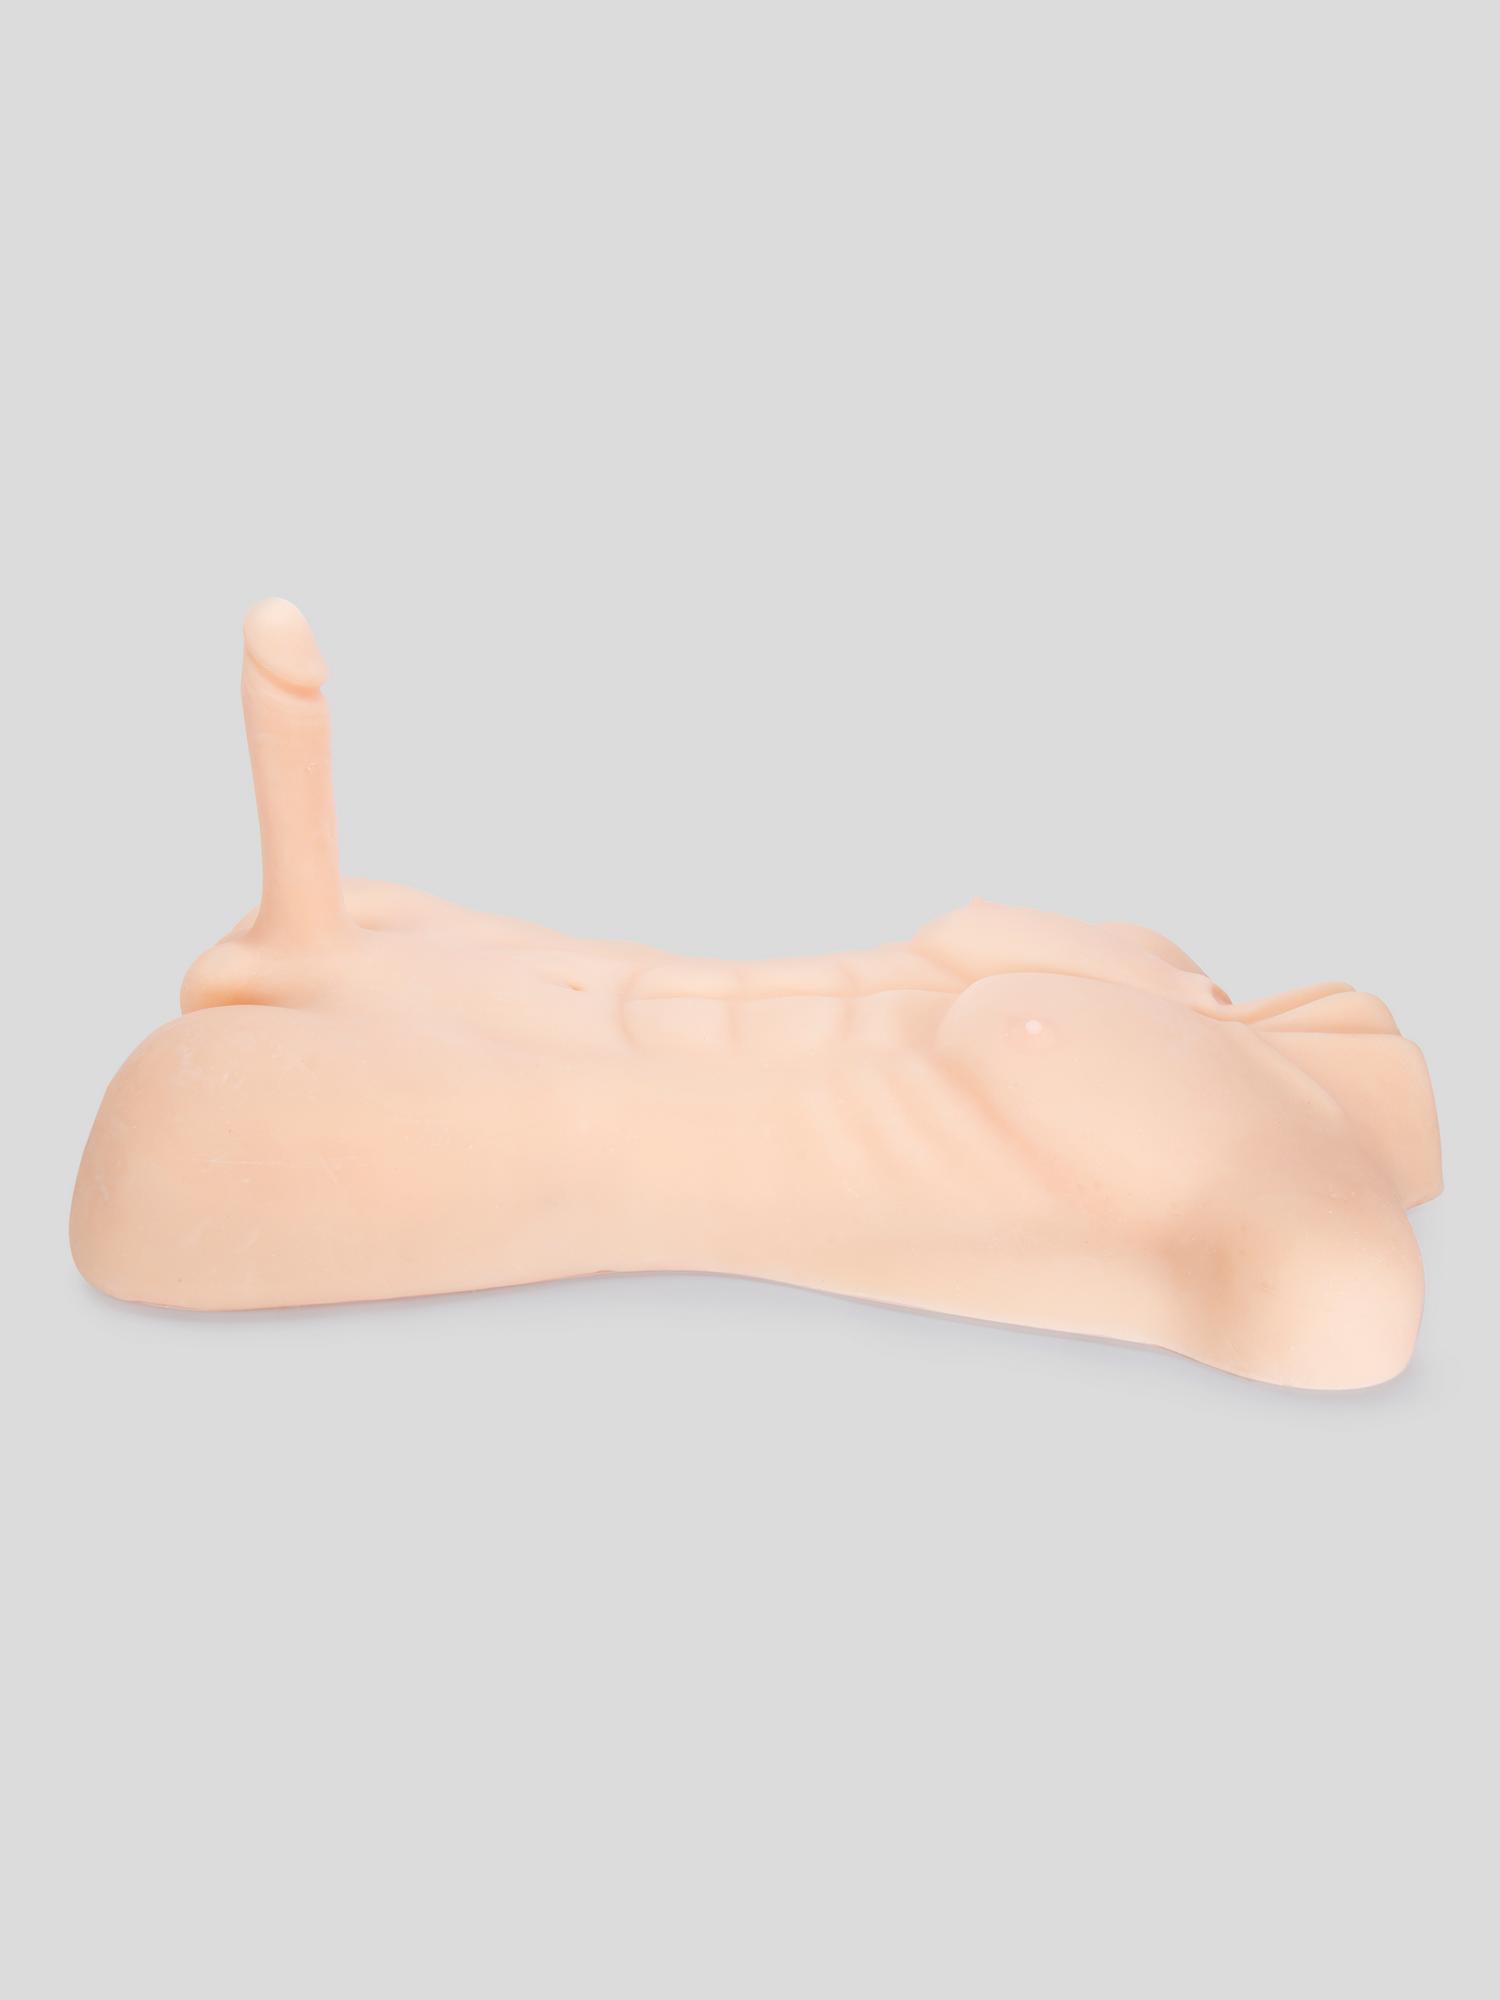 Pipedream Extreme Realistic Male Sex Doll 35oz. Slide 5